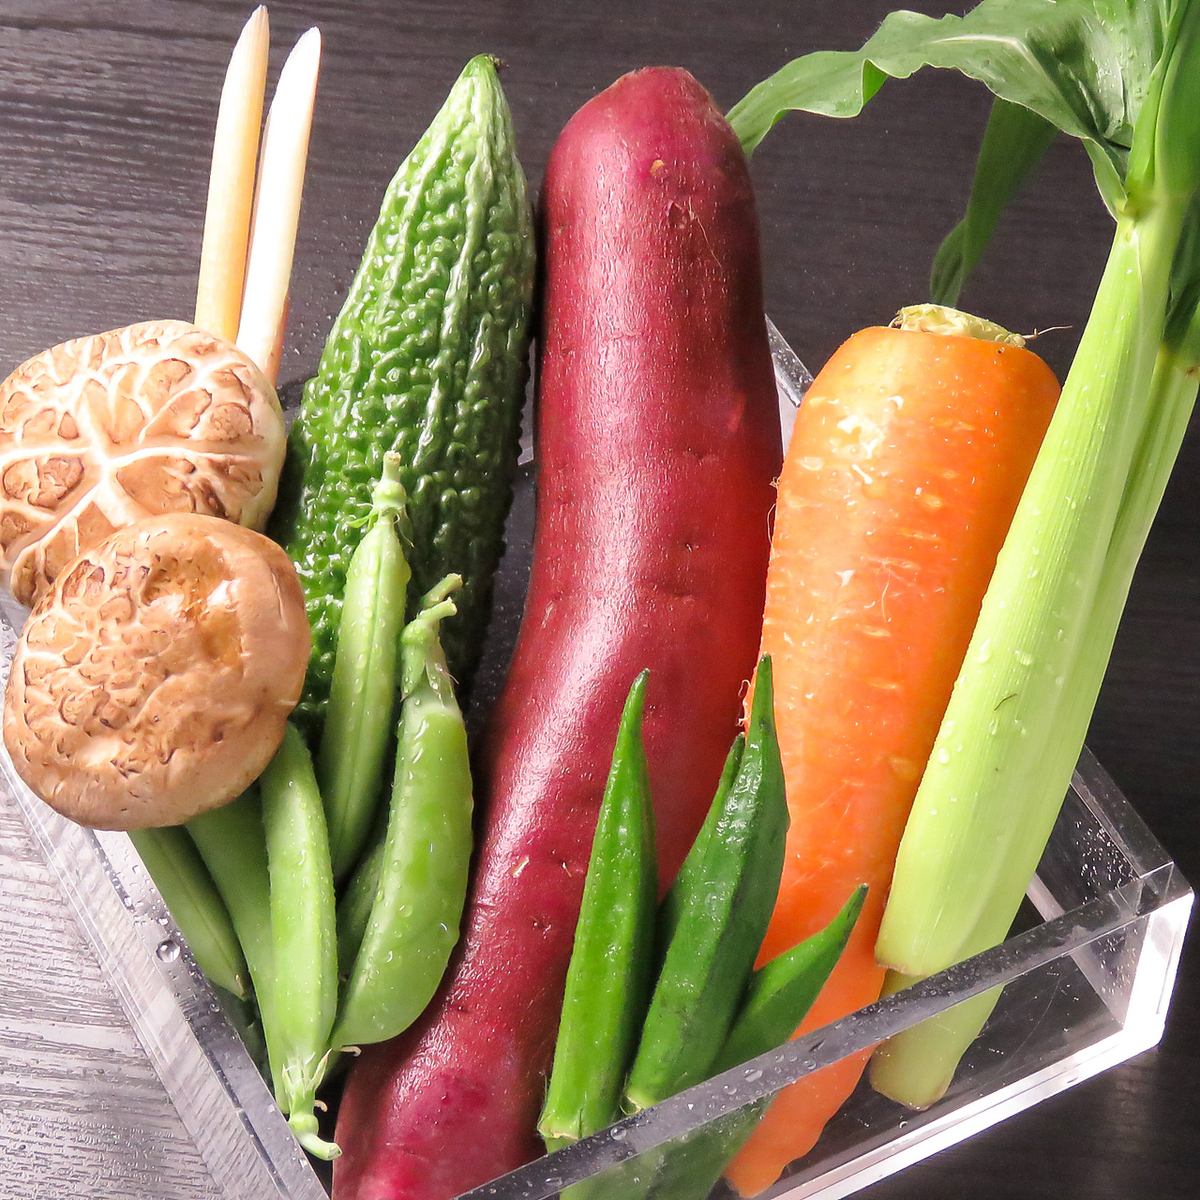 The vegetables purchased every morning from the Nagoya market are extremely fresh!